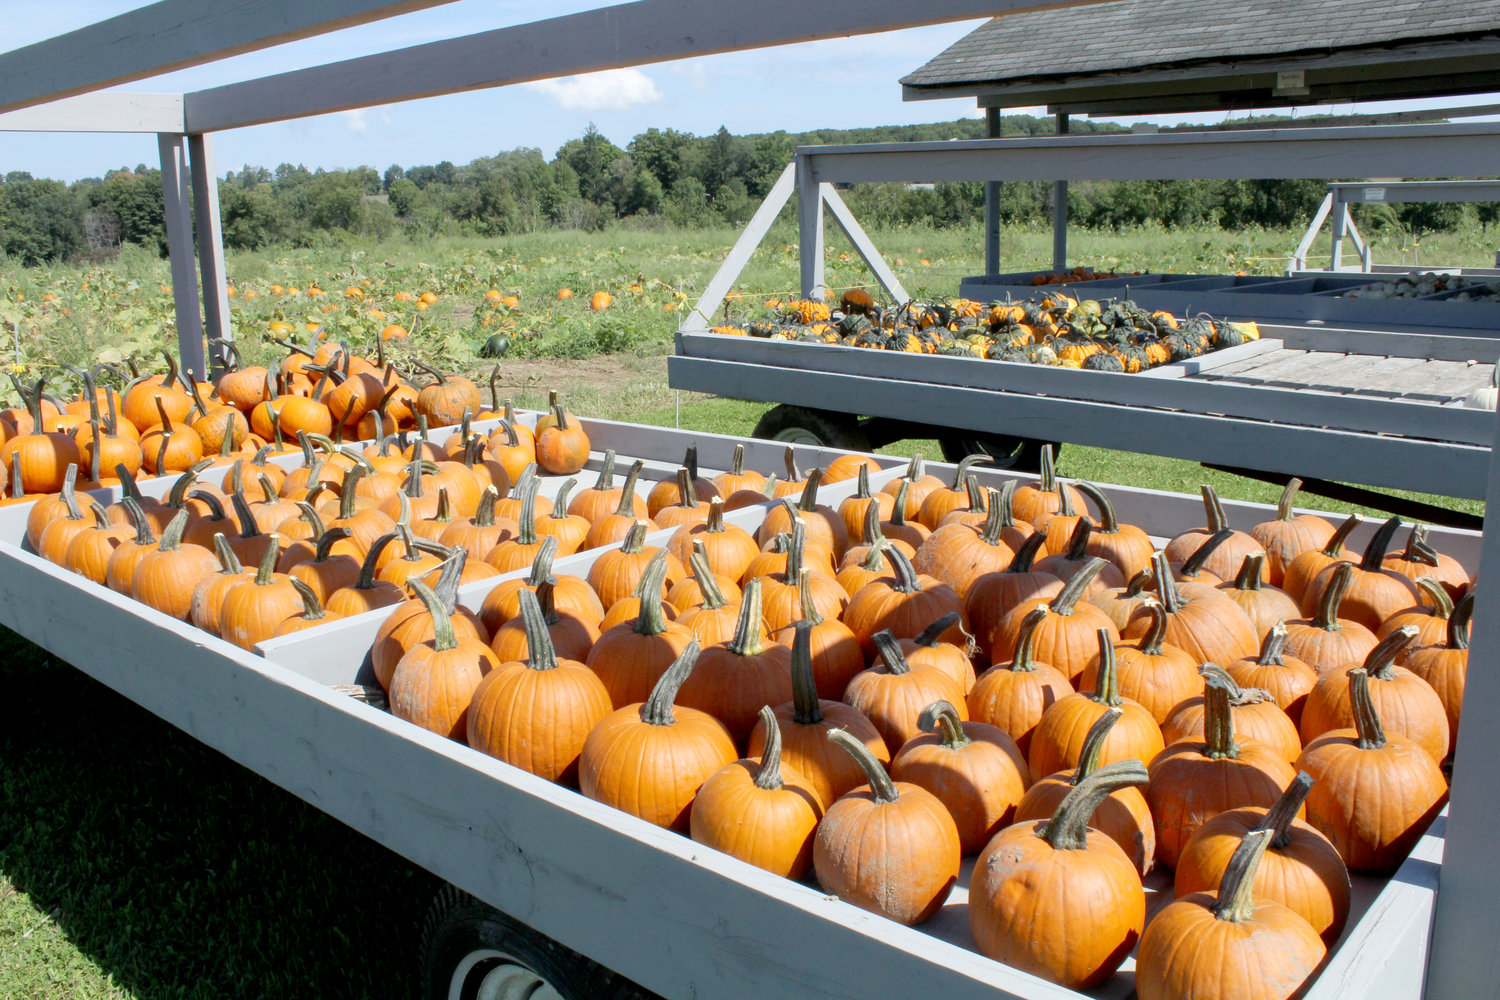 At the Cullen Pumpkin Farm, Richfield Springs, pumpkins and gourds are hand-planted and hand-harvested, ready for sale.